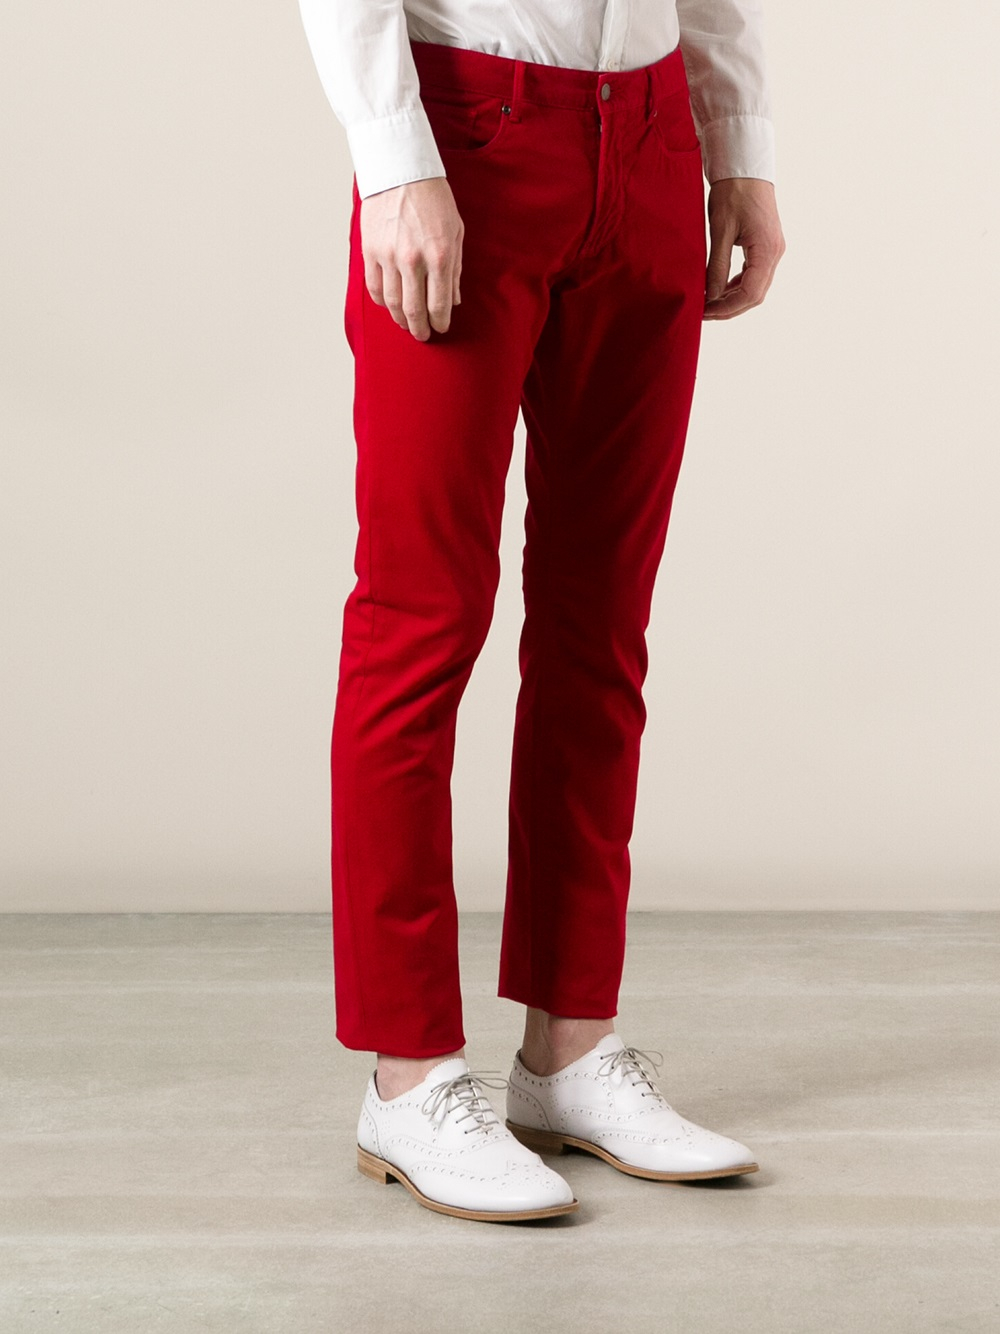 Lyst - Armani Jeans Skinny Chinos in Red for Men